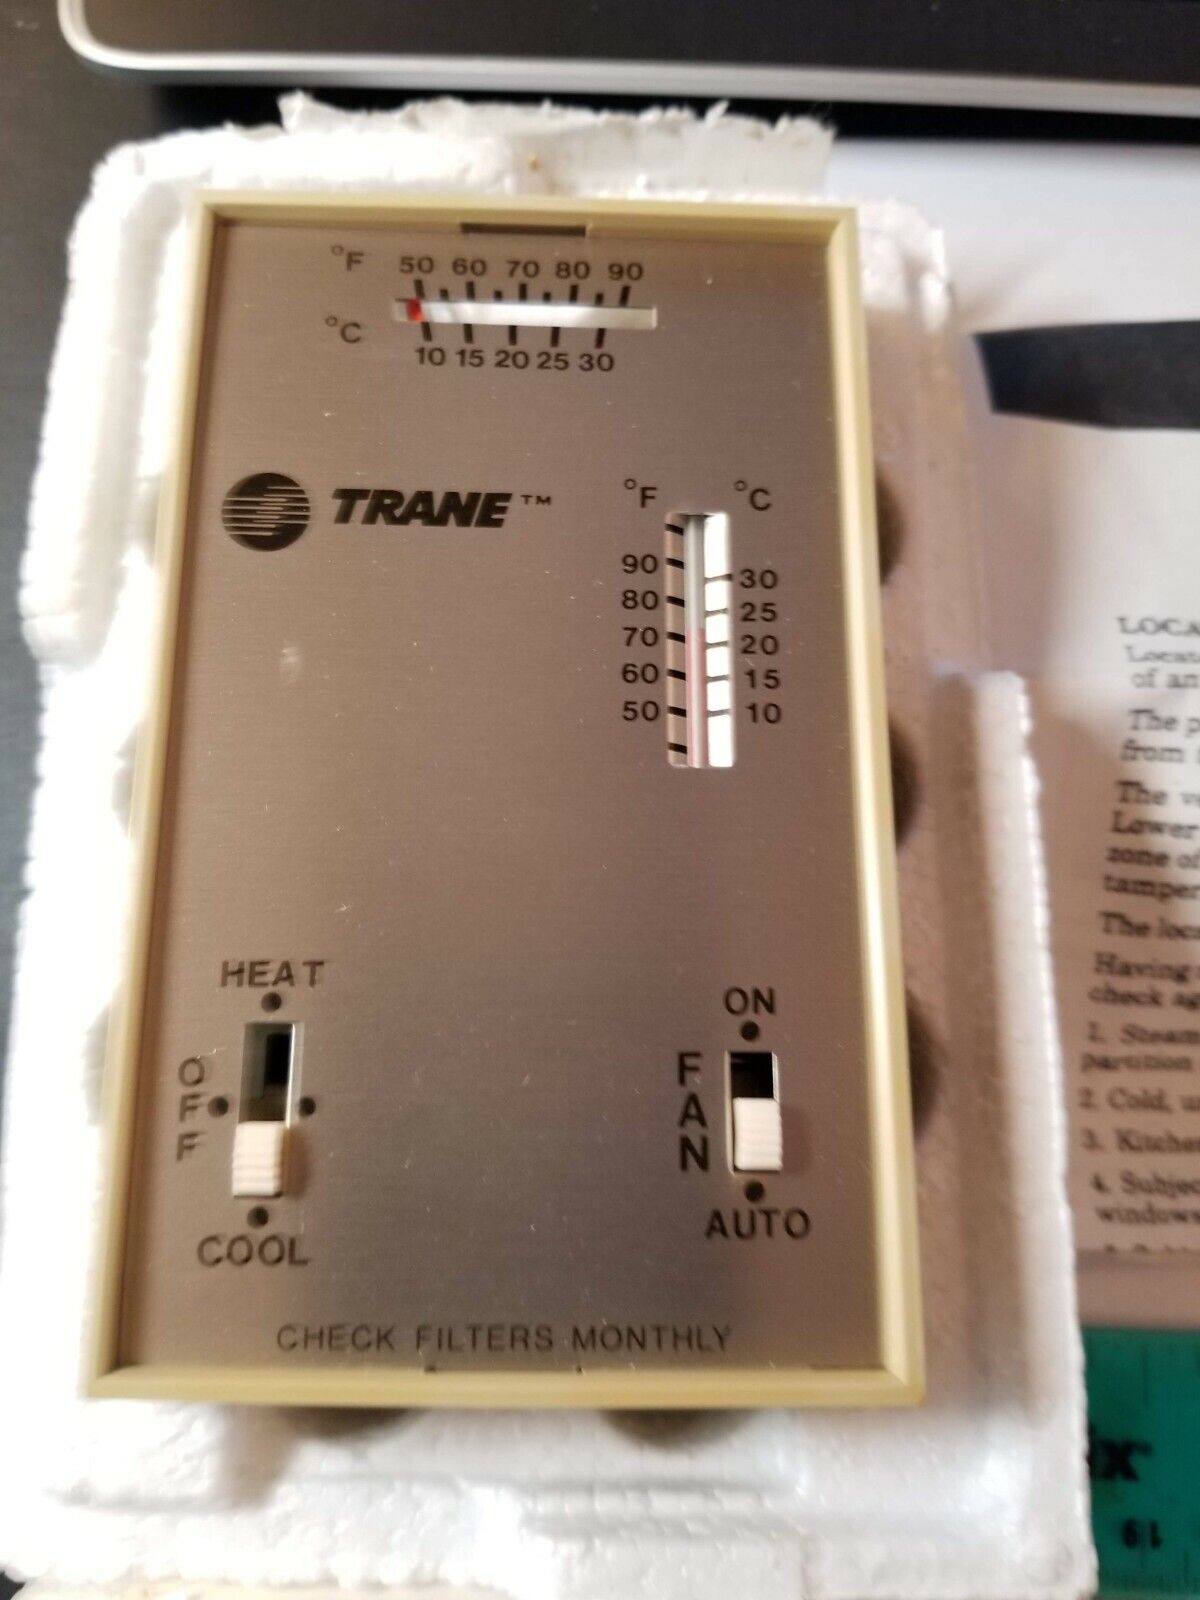 New Old Stock Trane Thermostat Model BayStat305  Heating And Cooling Controller